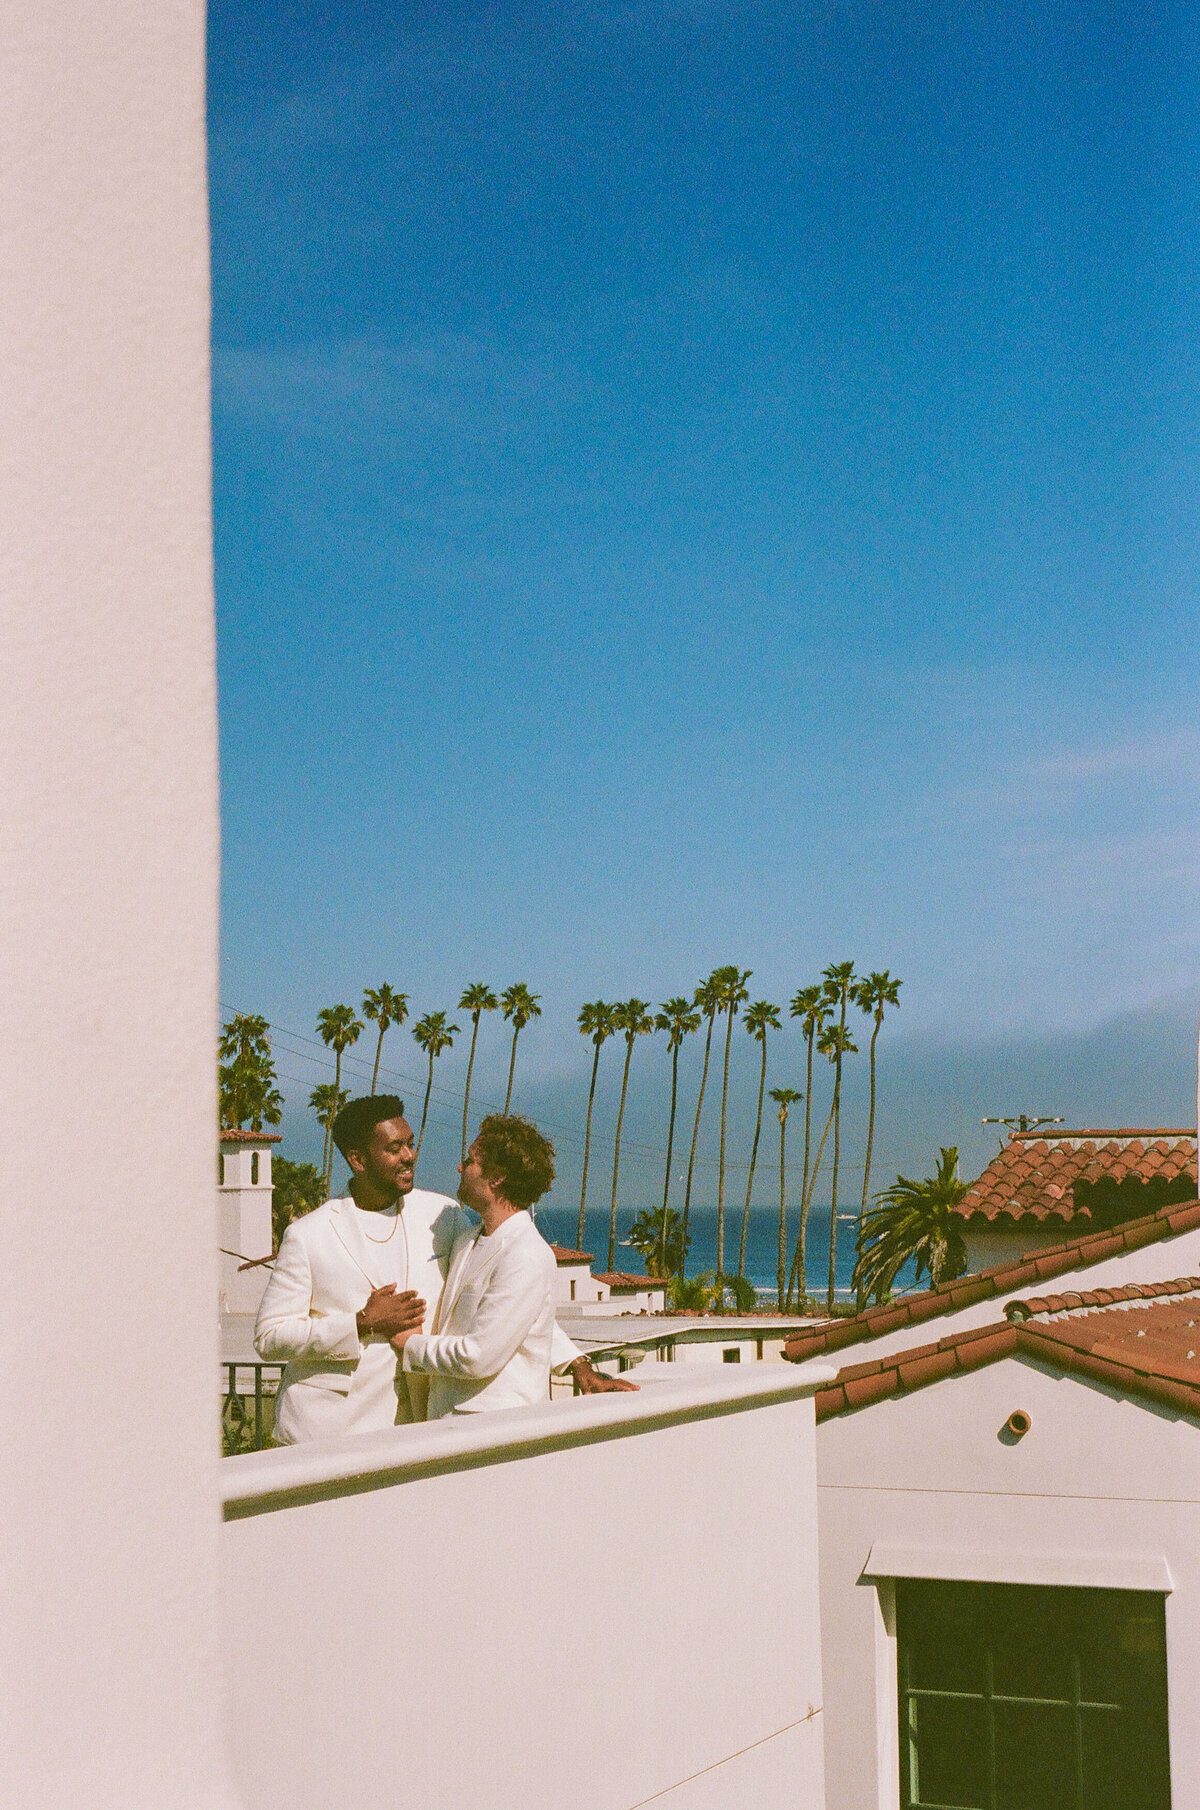 A couple standing together on a balcony.